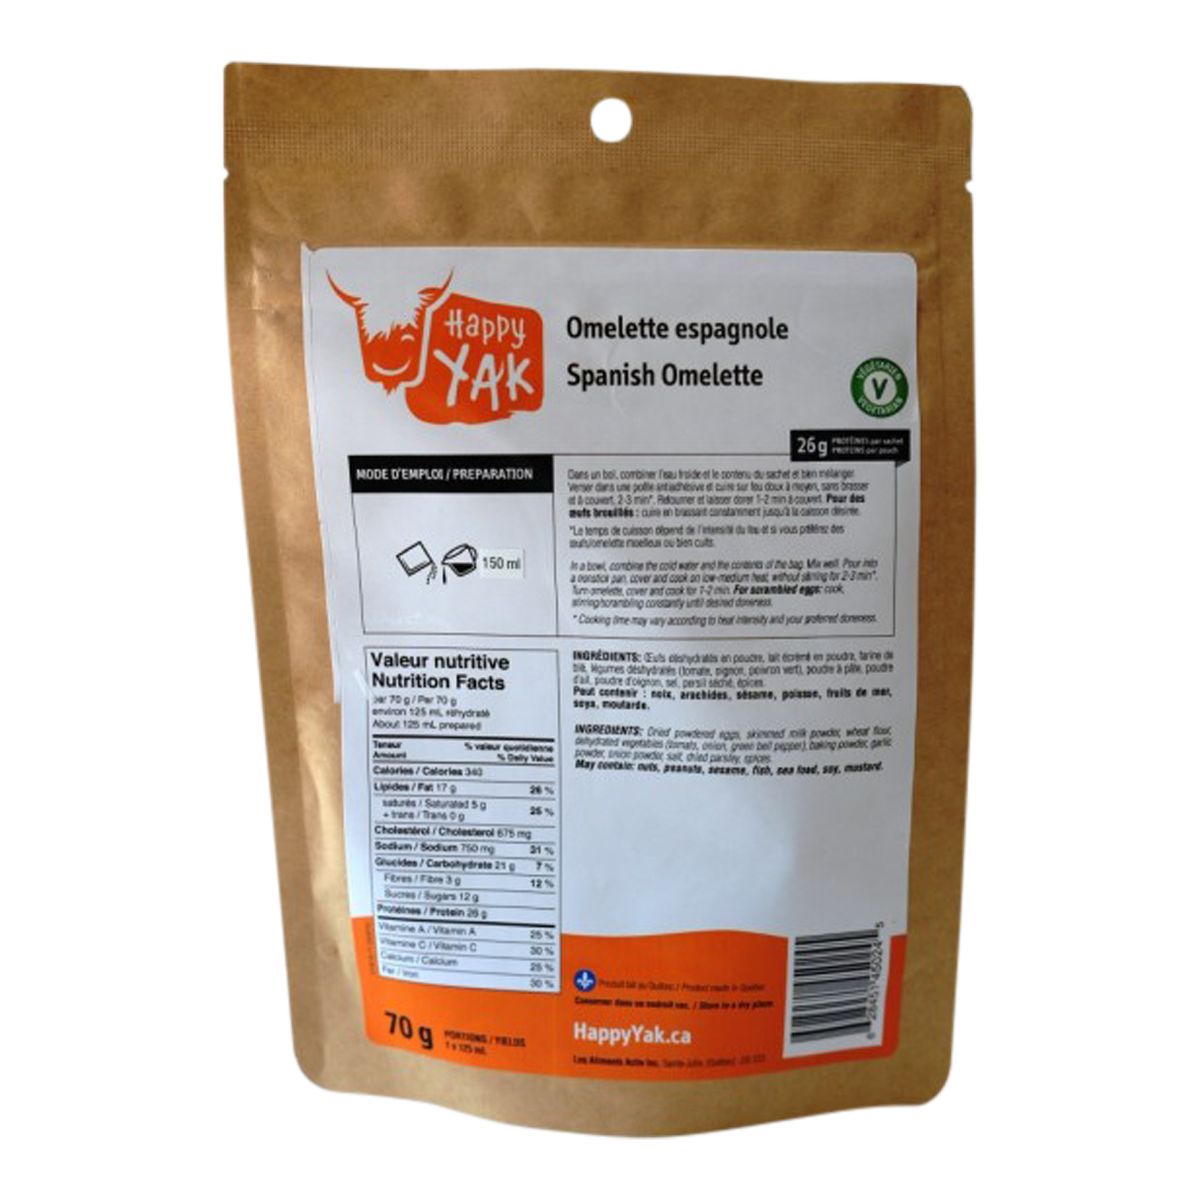 Image of Happy Yak Spanish Omelette Dehydrated Food Package